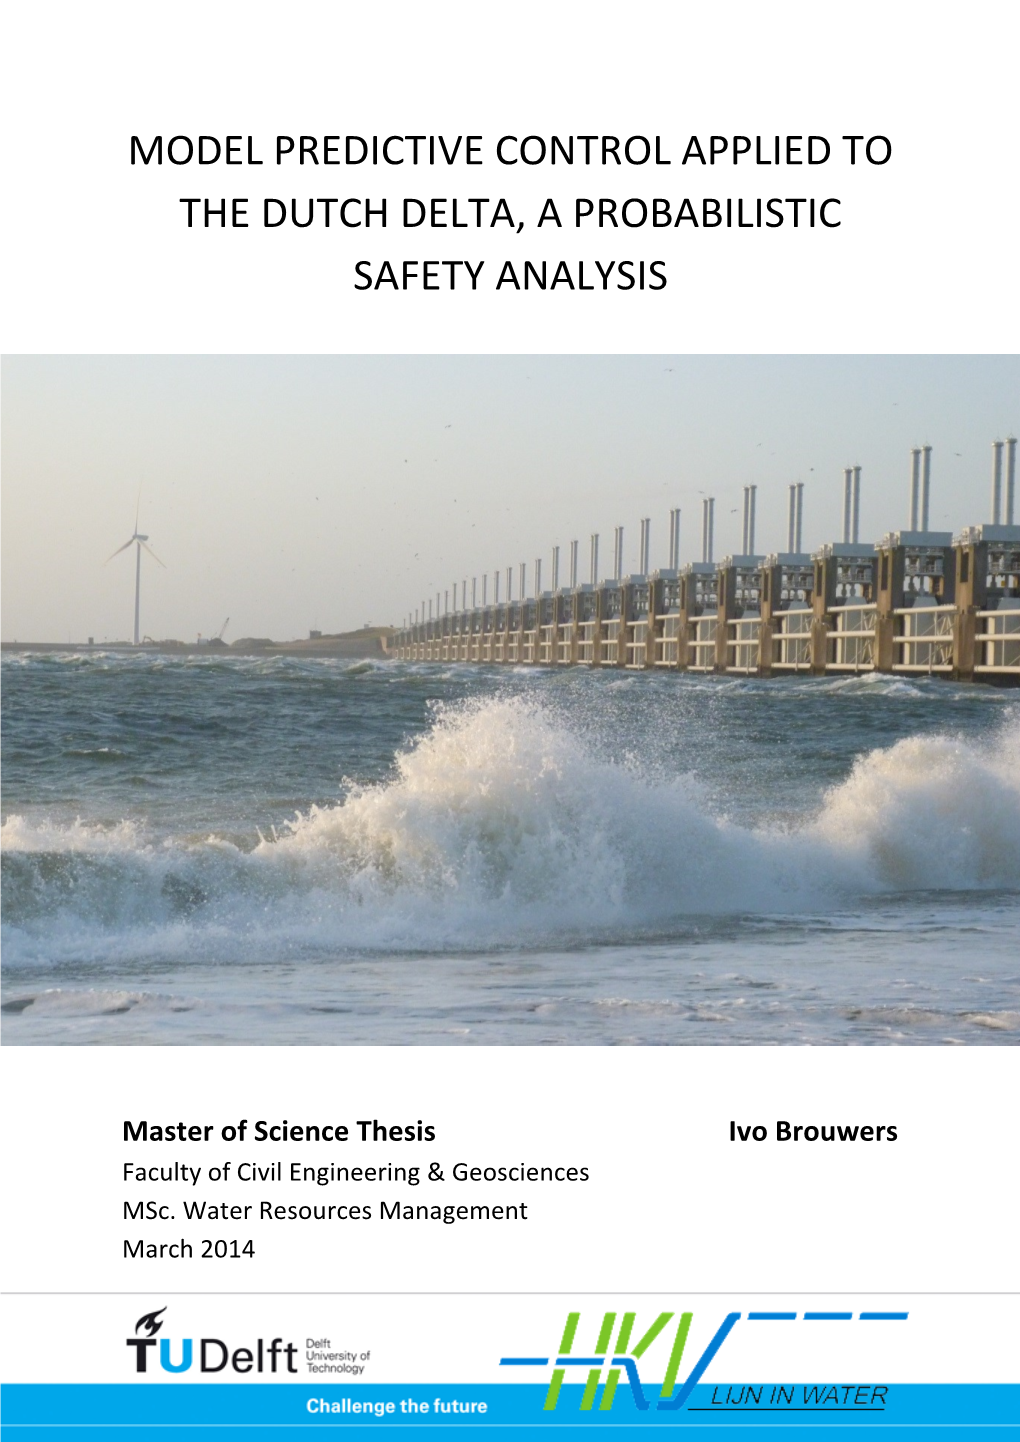 Model Predictive Control Applied to the Dutch Delta, a Probabilistic Safety Analysis